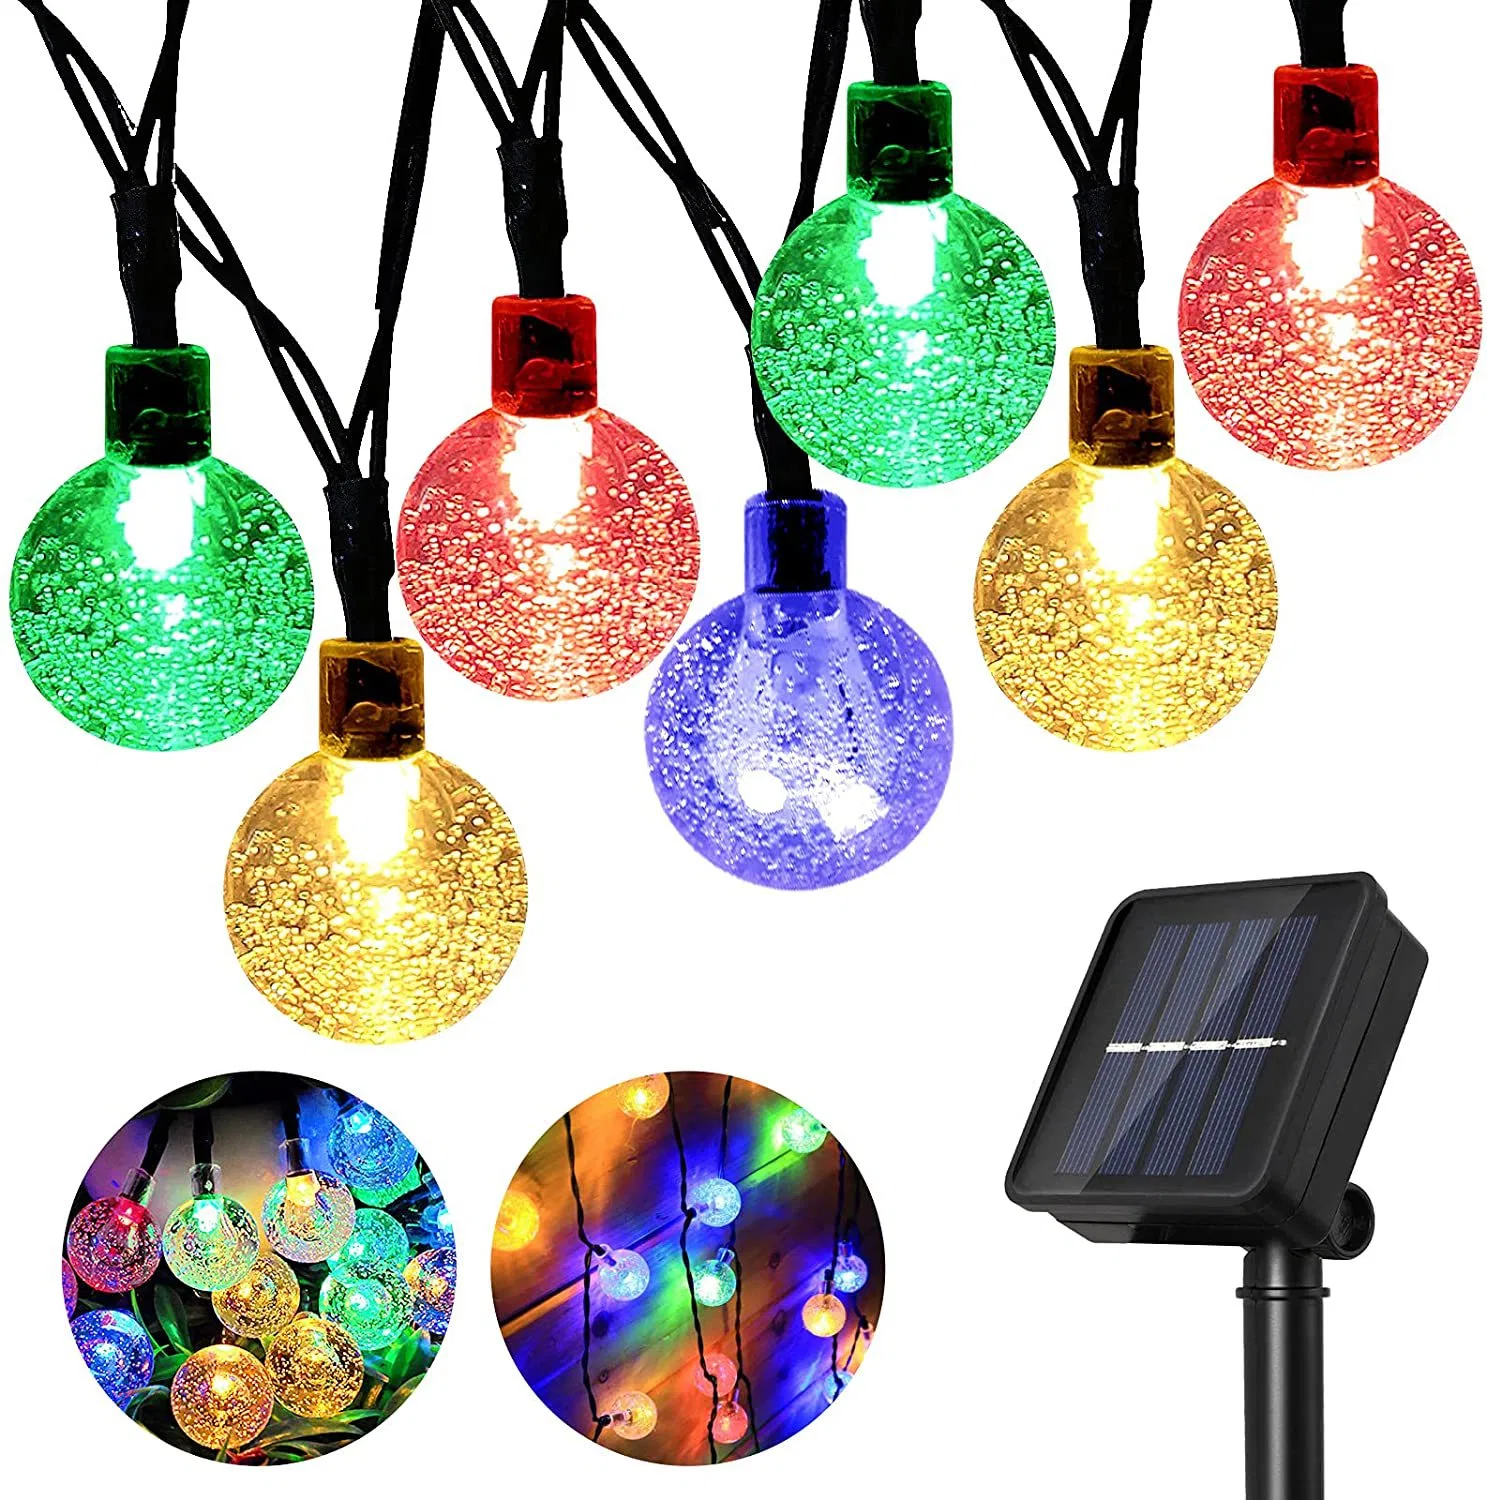 Solar Outdoor Camping Water Drop Decorative Light Crystal Ball LED String Lights